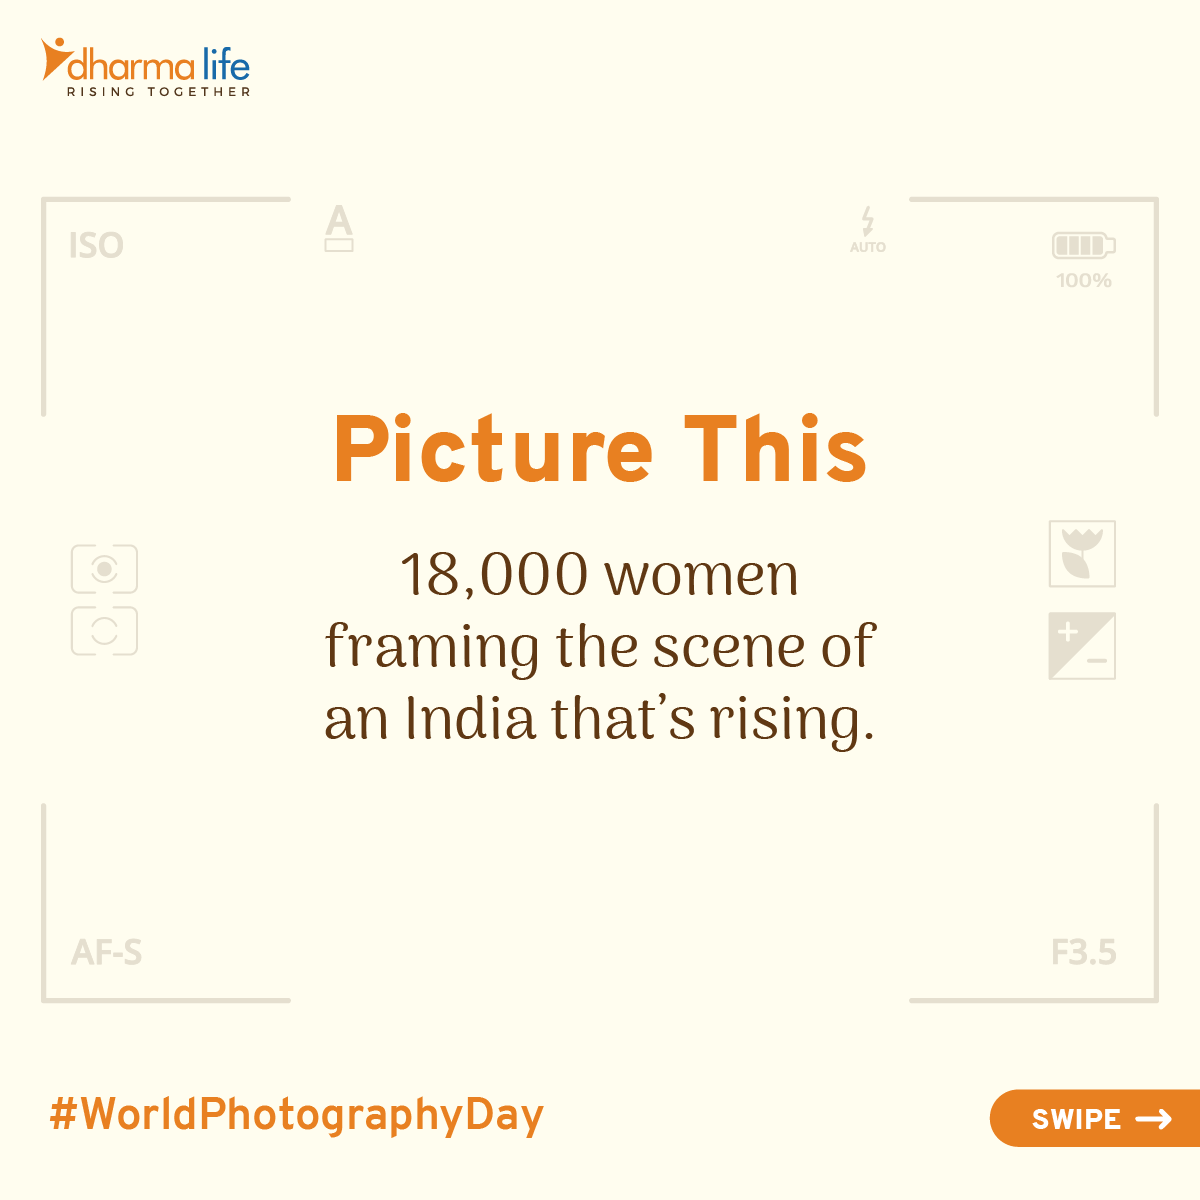 When photos are not enough, we rely on words to evoke a thousand pictures. 

#PhotographyDay #worldphotographyday #photography #india #world #photographers #BreakTheBias #Women #Rural #WomenRaising #RisingTogether